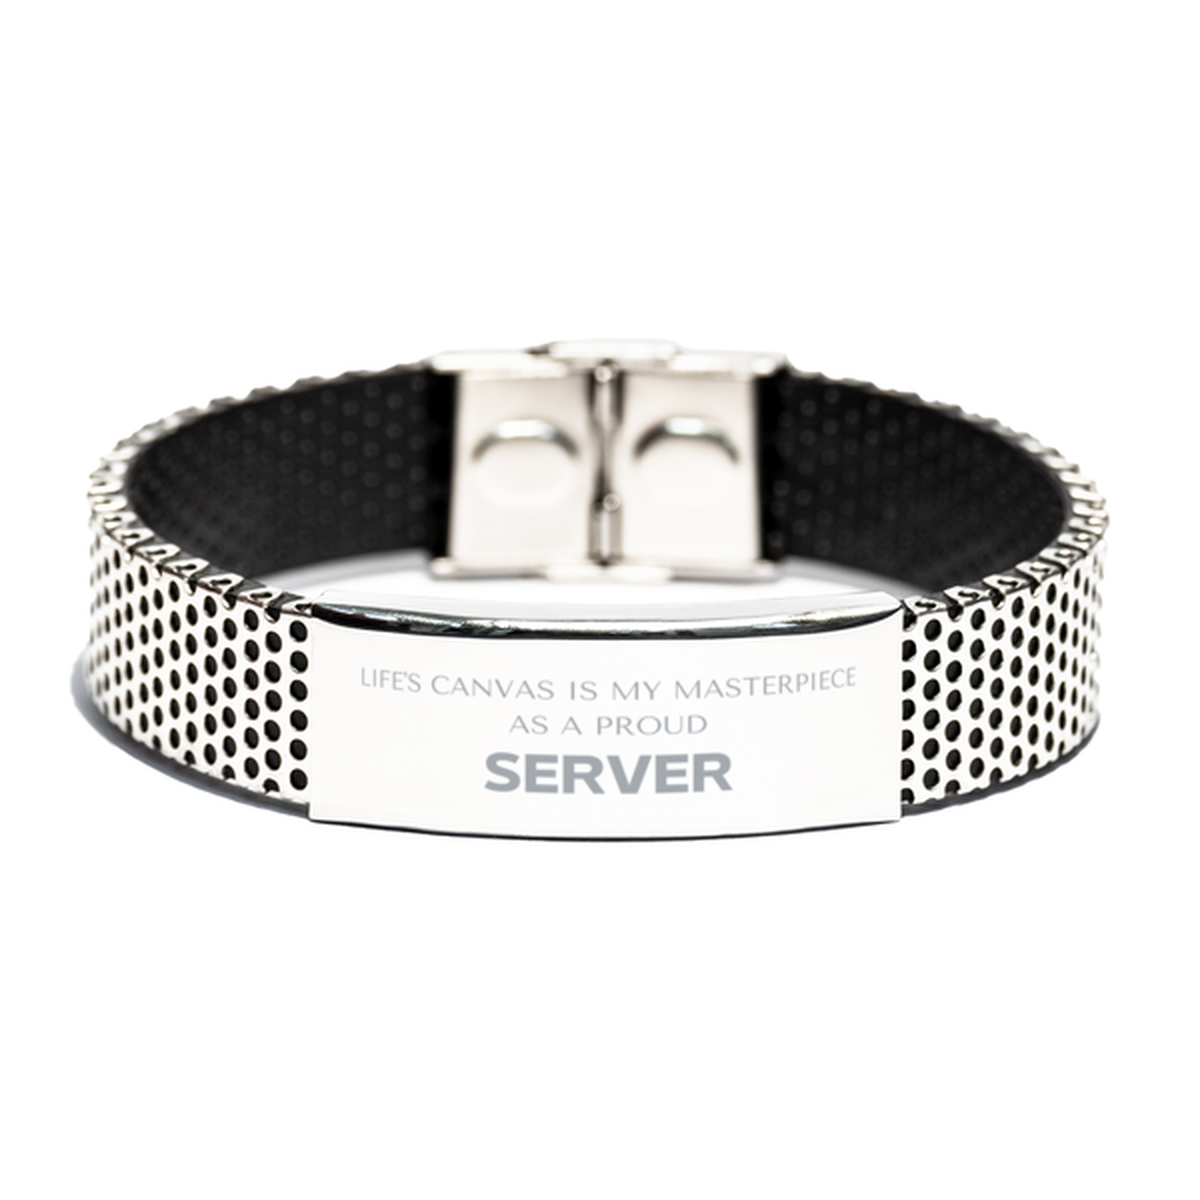 Proud Server Gifts, Life's canvas is my masterpiece, Epic Birthday Christmas Unique Stainless Steel Bracelet For Server, Coworkers, Men, Women, Friends